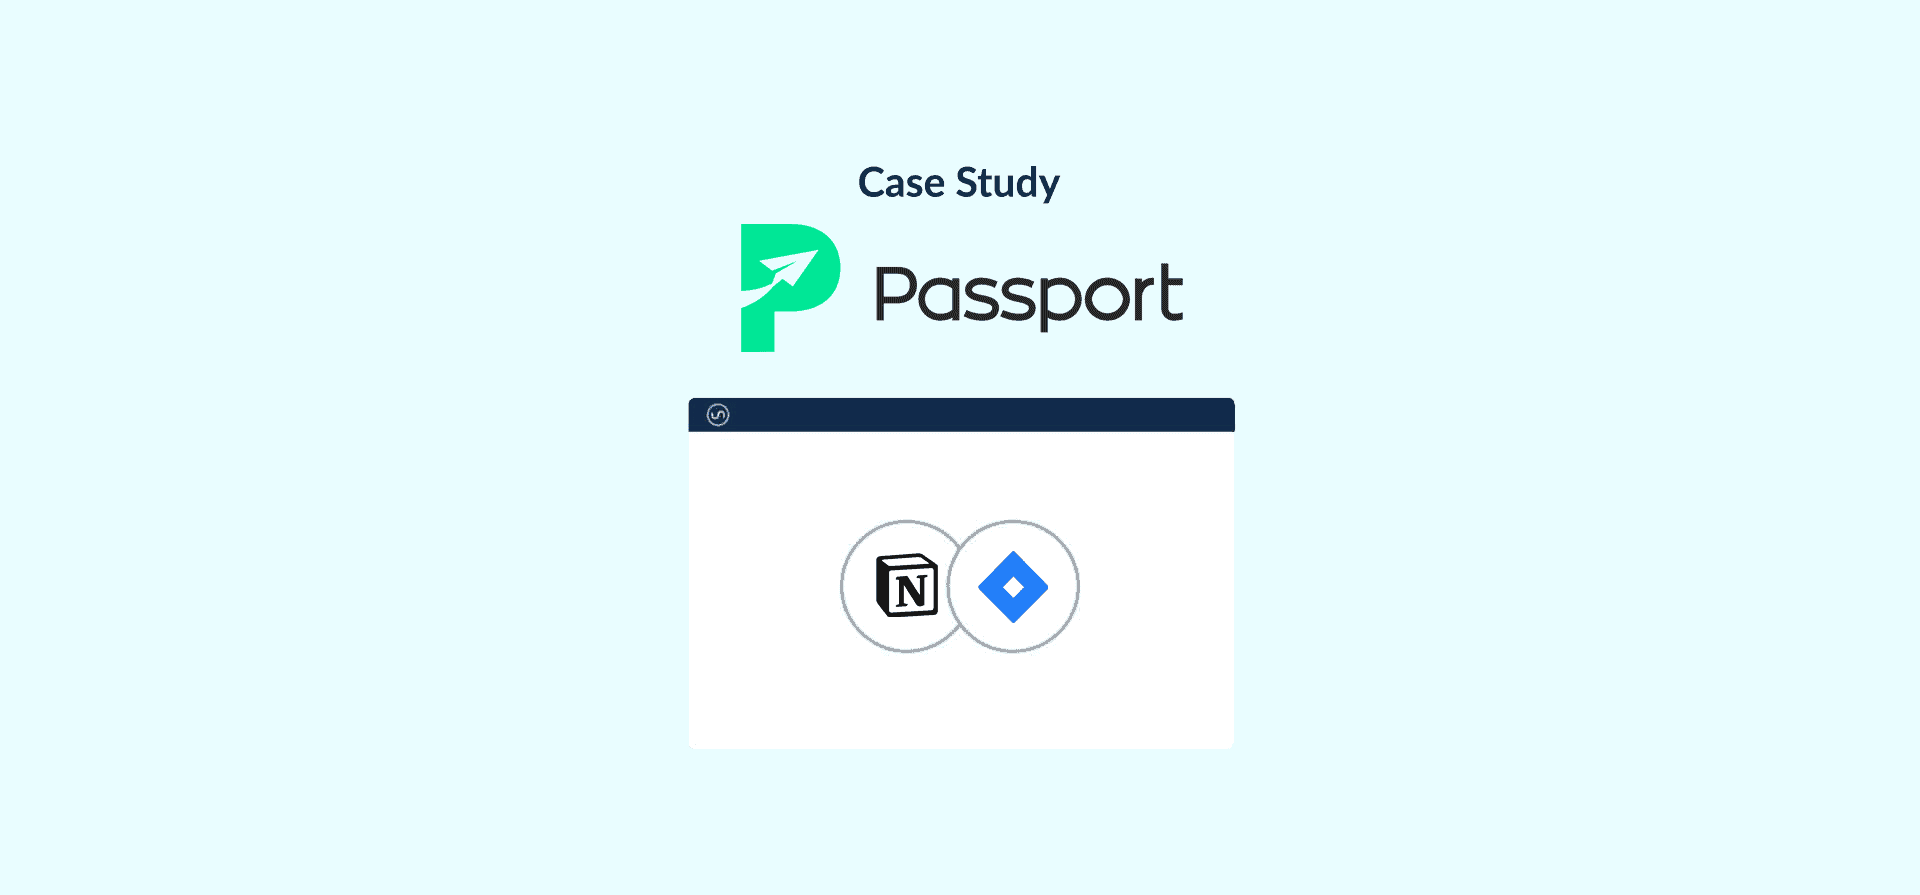 Logos for jira and notion, representing the Passport Shipping case study.